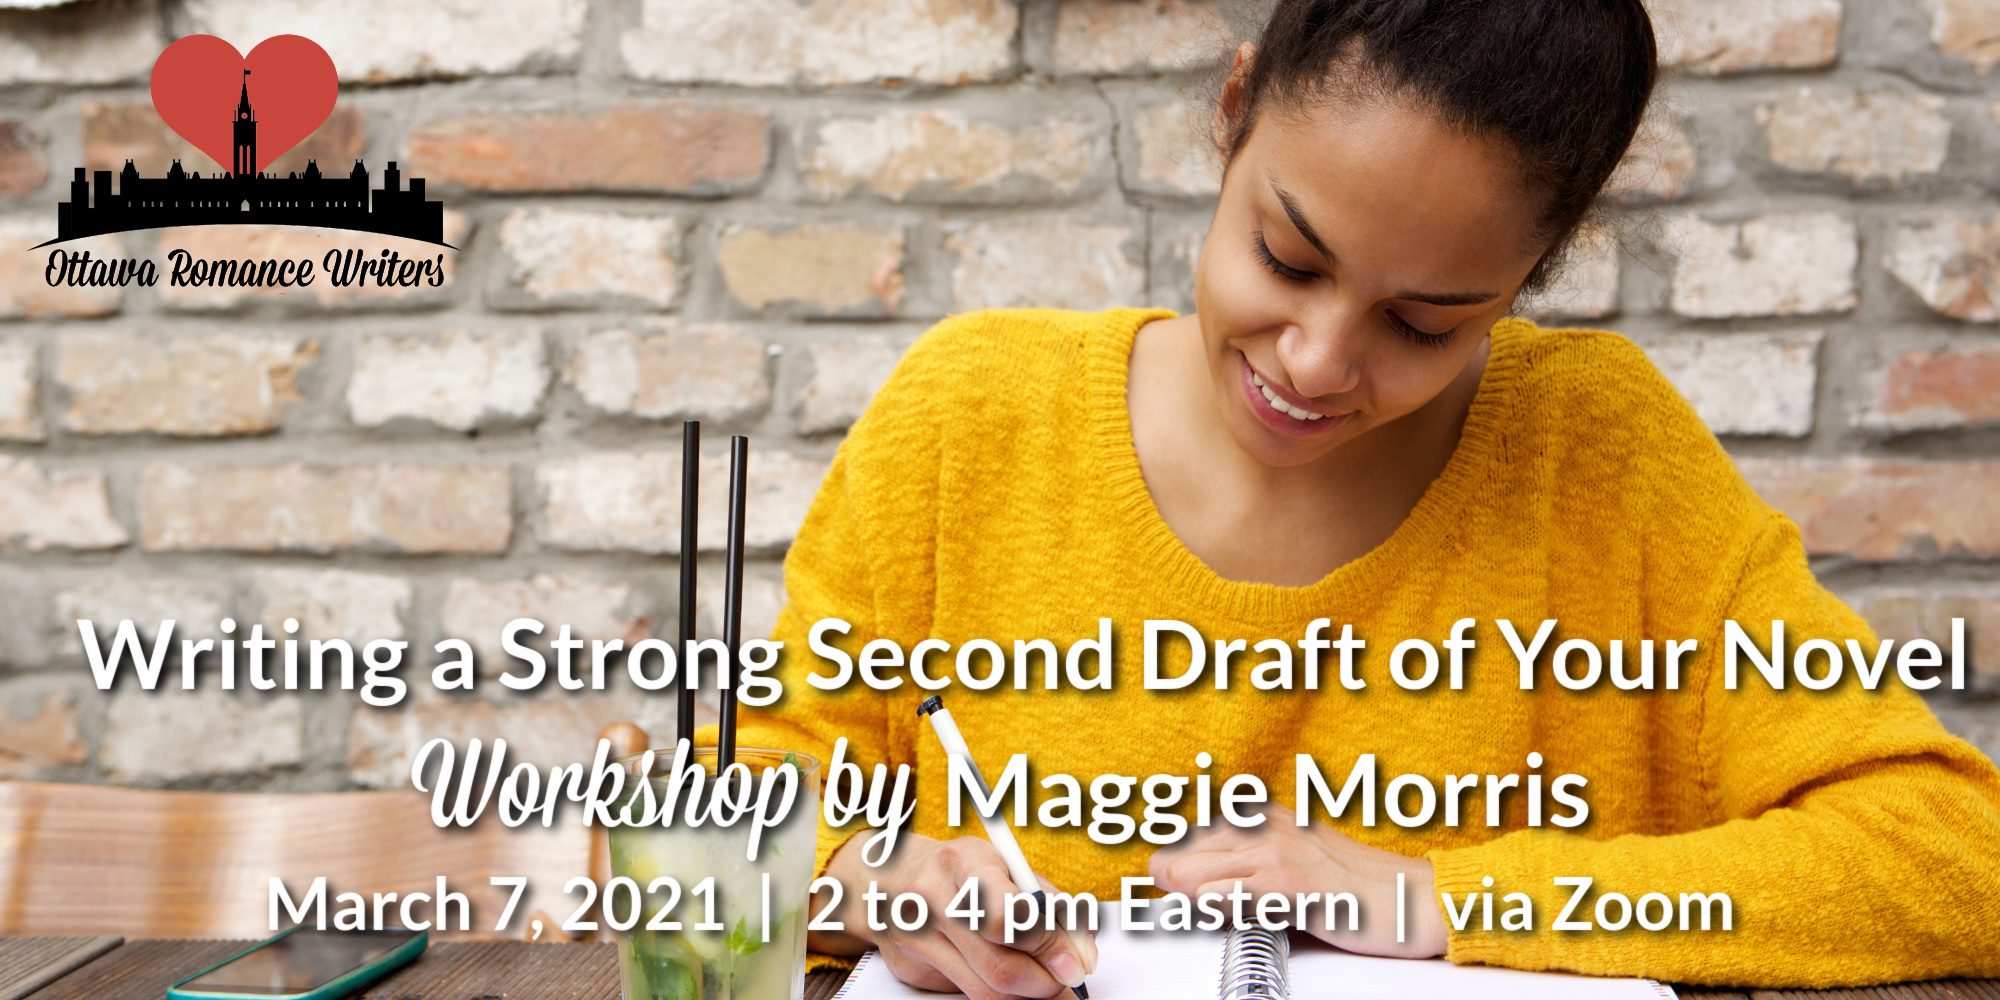 March 7, 2021 Workshop – Writing a Strong Second Draft of Your Novel